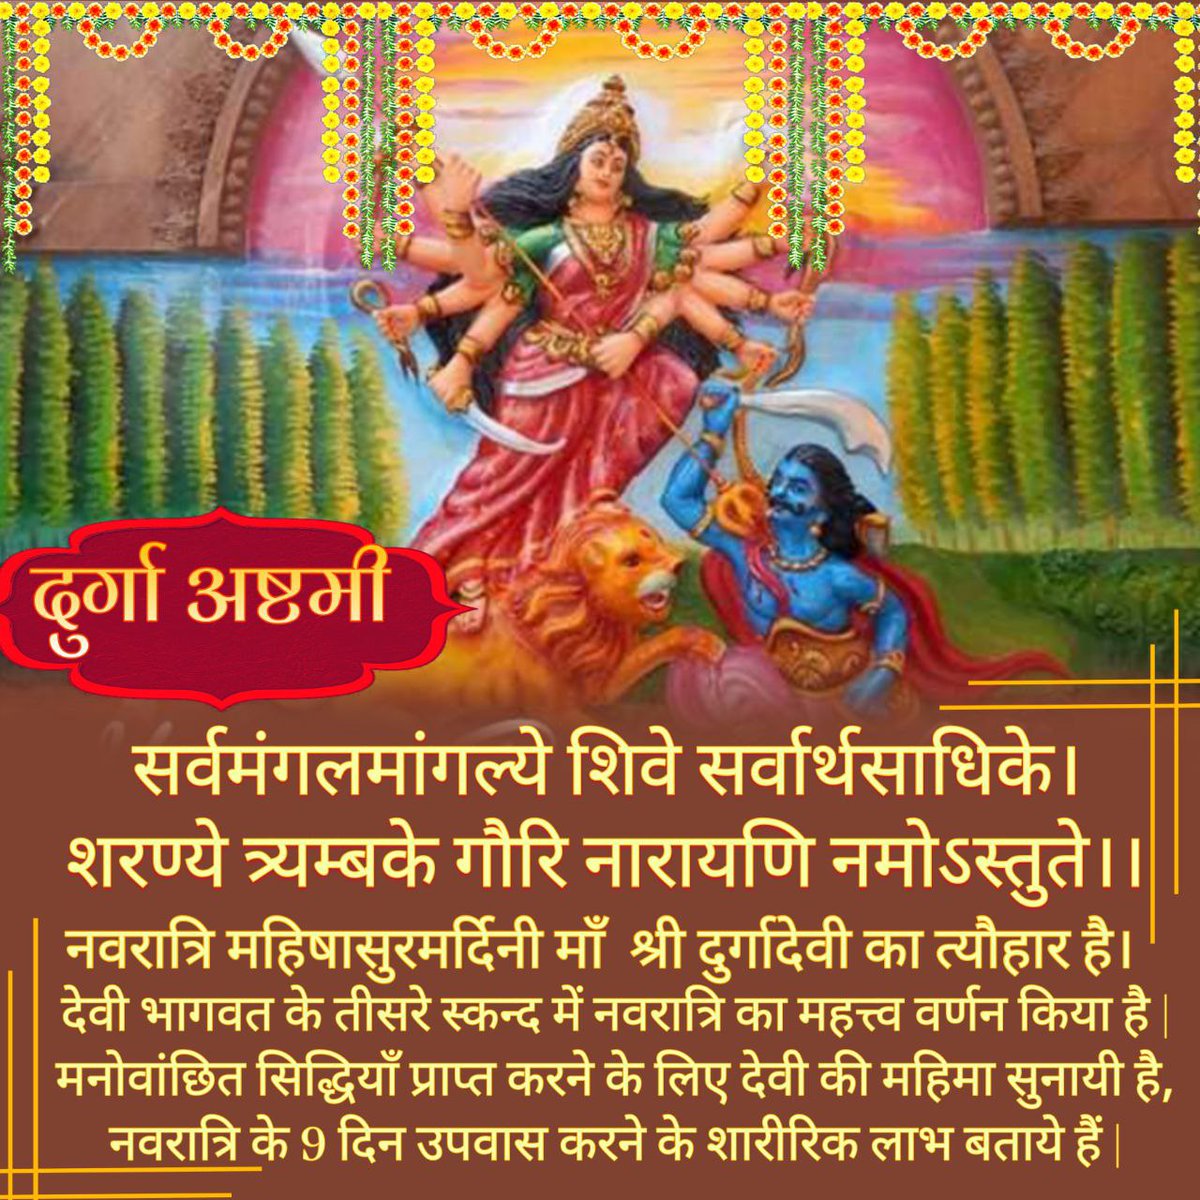 🚩जय श्री राम 🚩 Sant Shri Asharamji Bapu say's 🚩According to Indian culture, 🚩all the festivals that come, are meant to upgrade us and increase our faith in God and one of them is 🚩Shardiya Navratri. Which gives us the message of Shakti Upasana. 🚩happy #DurgaAshtami.🚩